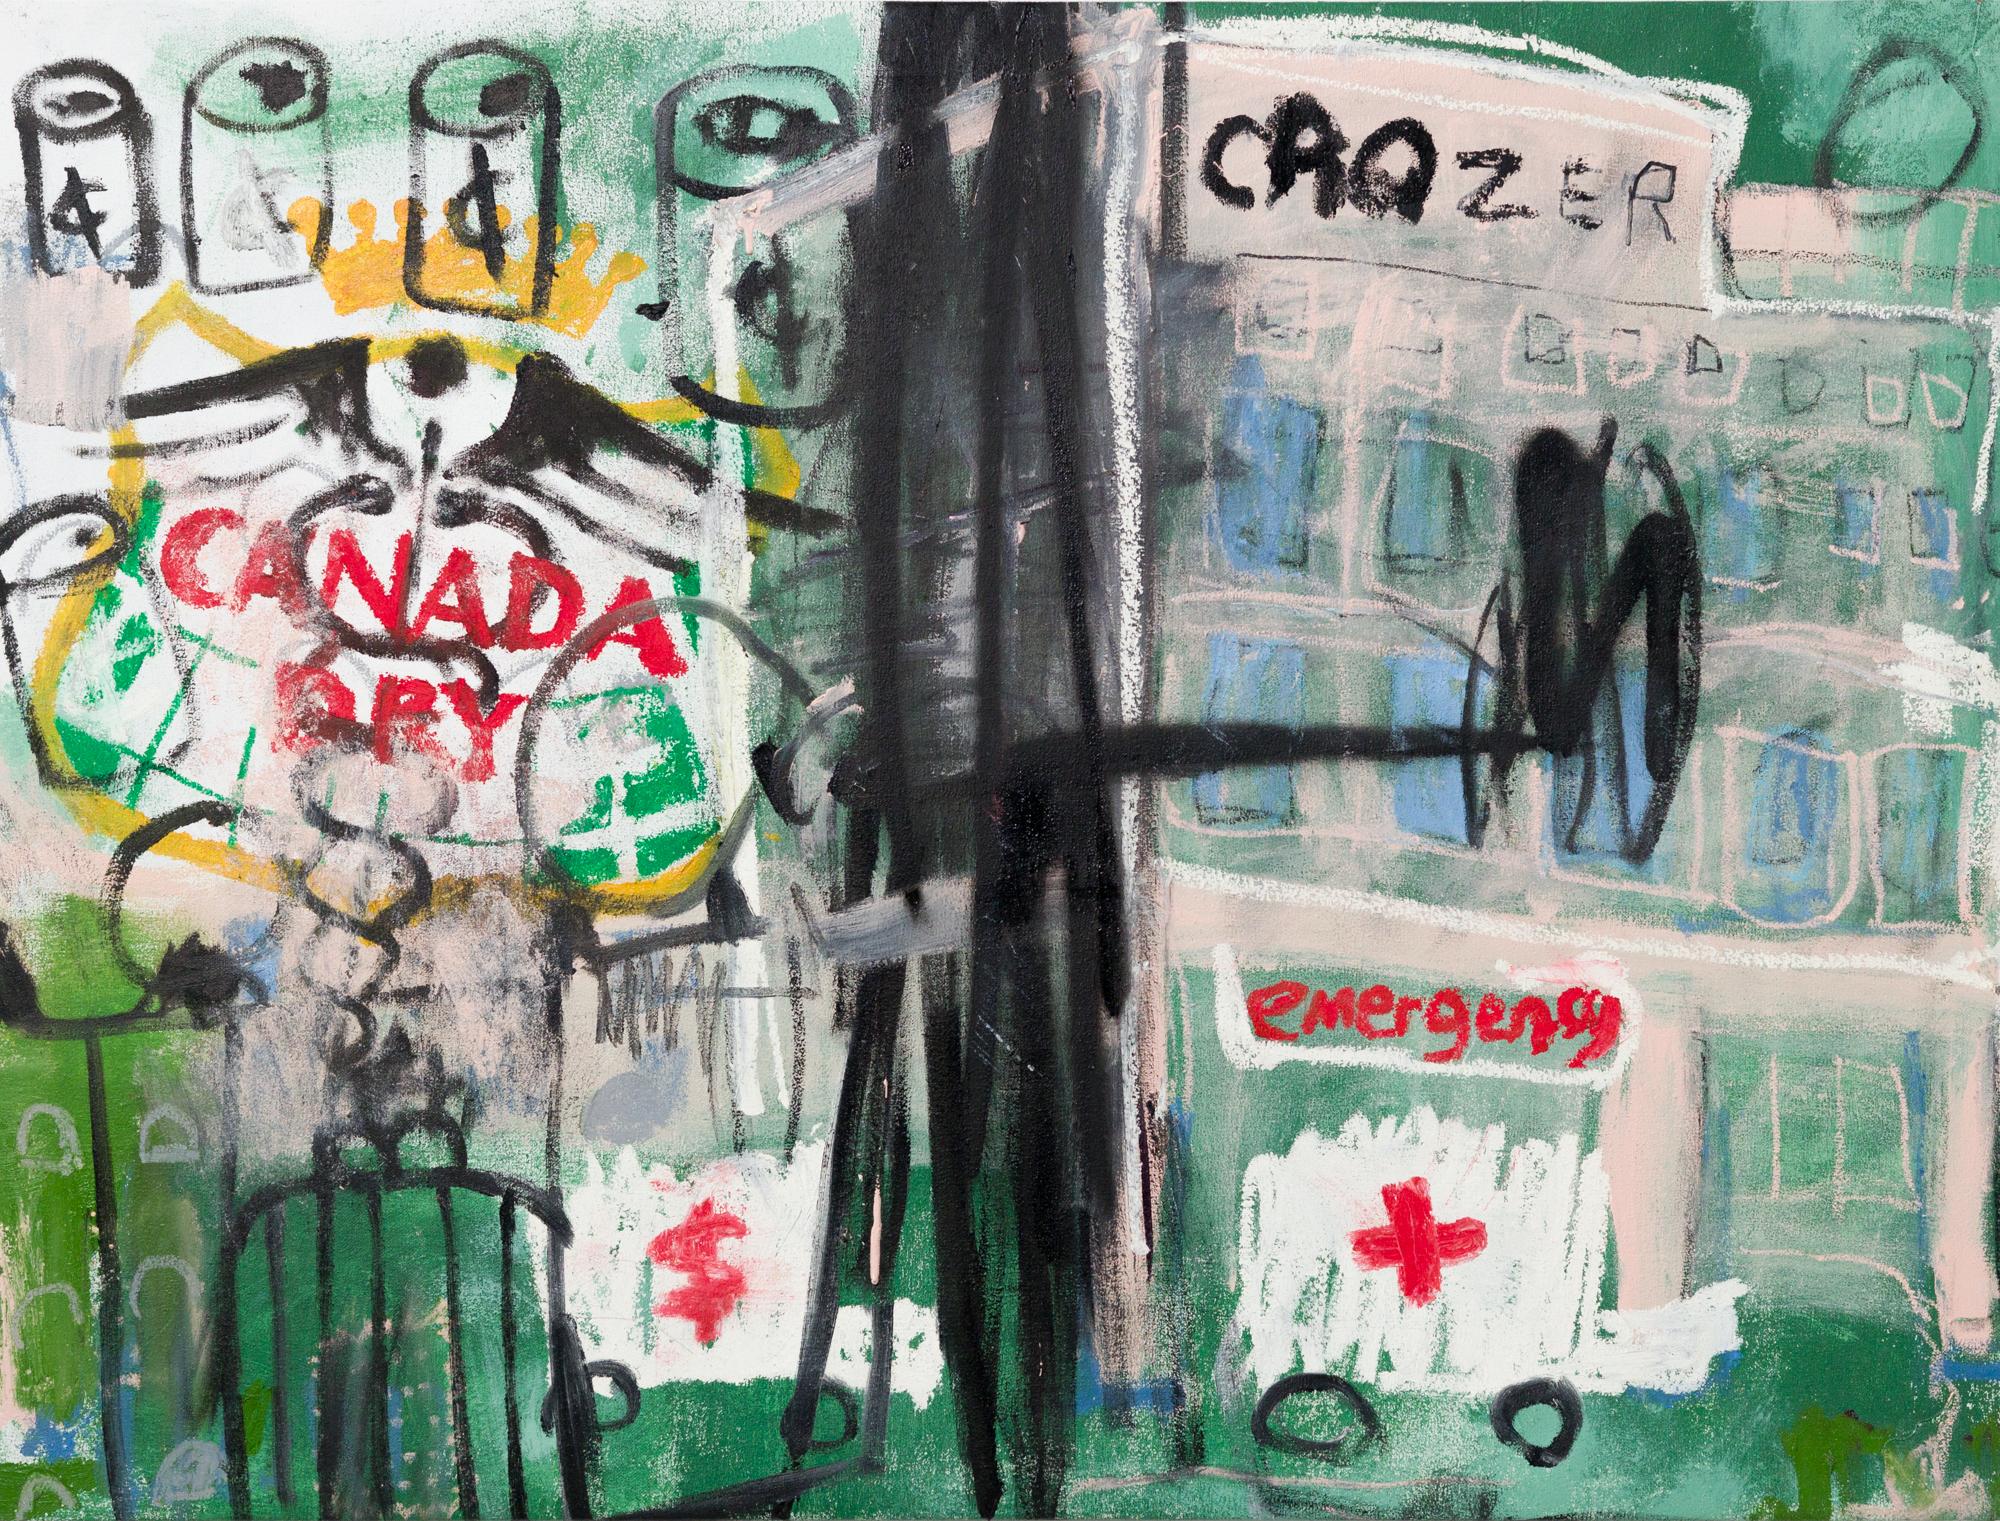 "Black Medicine", Ginger ale, medical disparity, abstract hospital, money - Painting by Caff Adeus